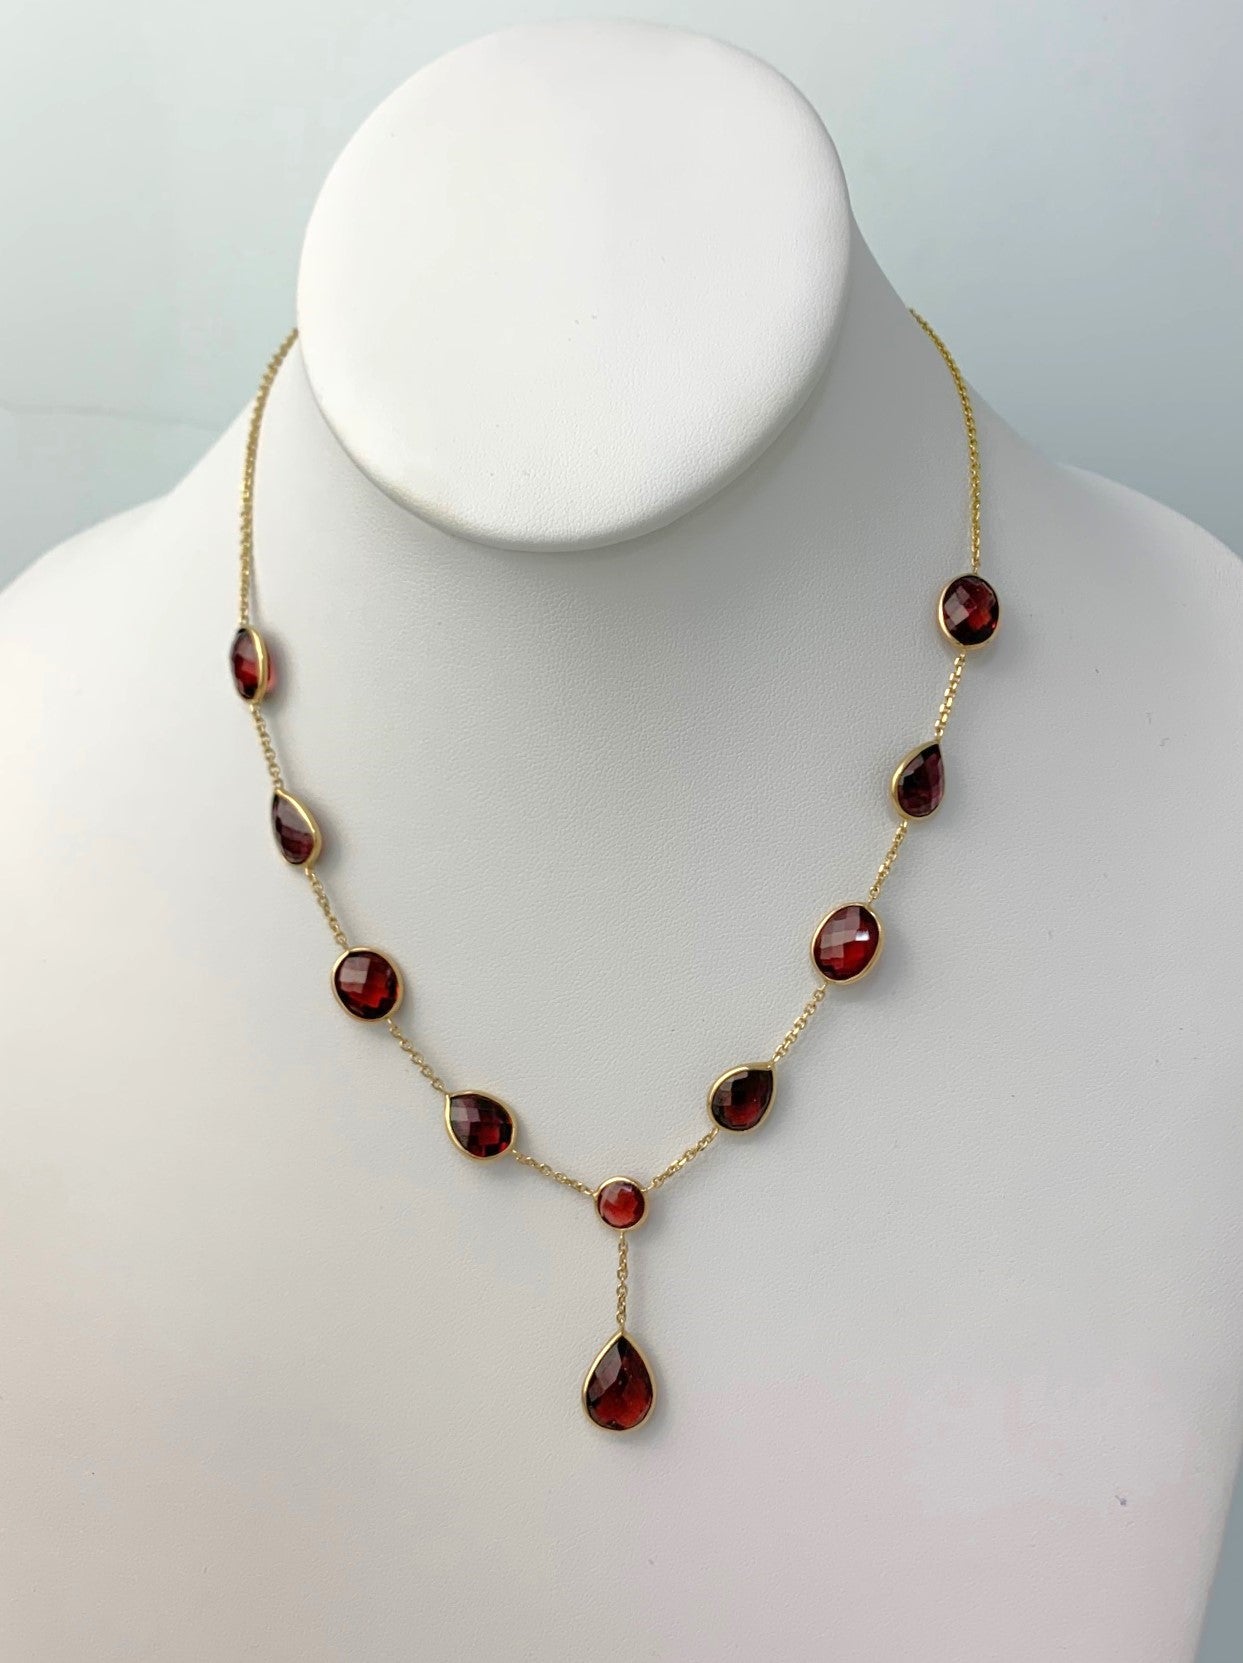 16" Round And Pear Briolette Lariat Bezel Necklace With Pear Drop in 14KY - NCK-323-BZGM14Y-GNT-16